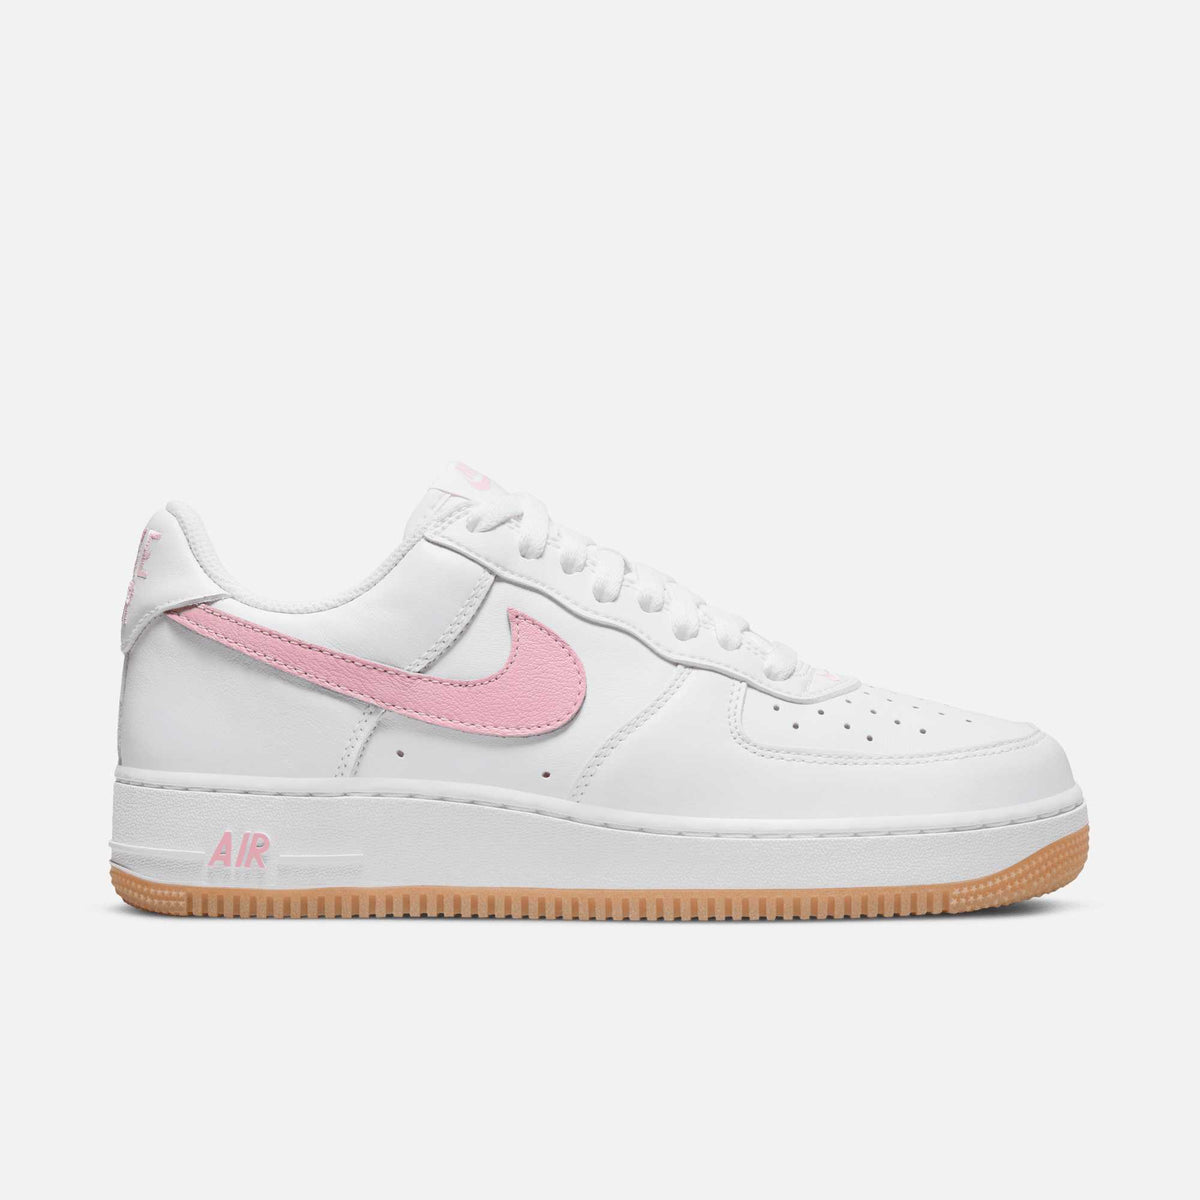 Nike Air Force 1 Low Since 82 Pink Gum DM0576-101